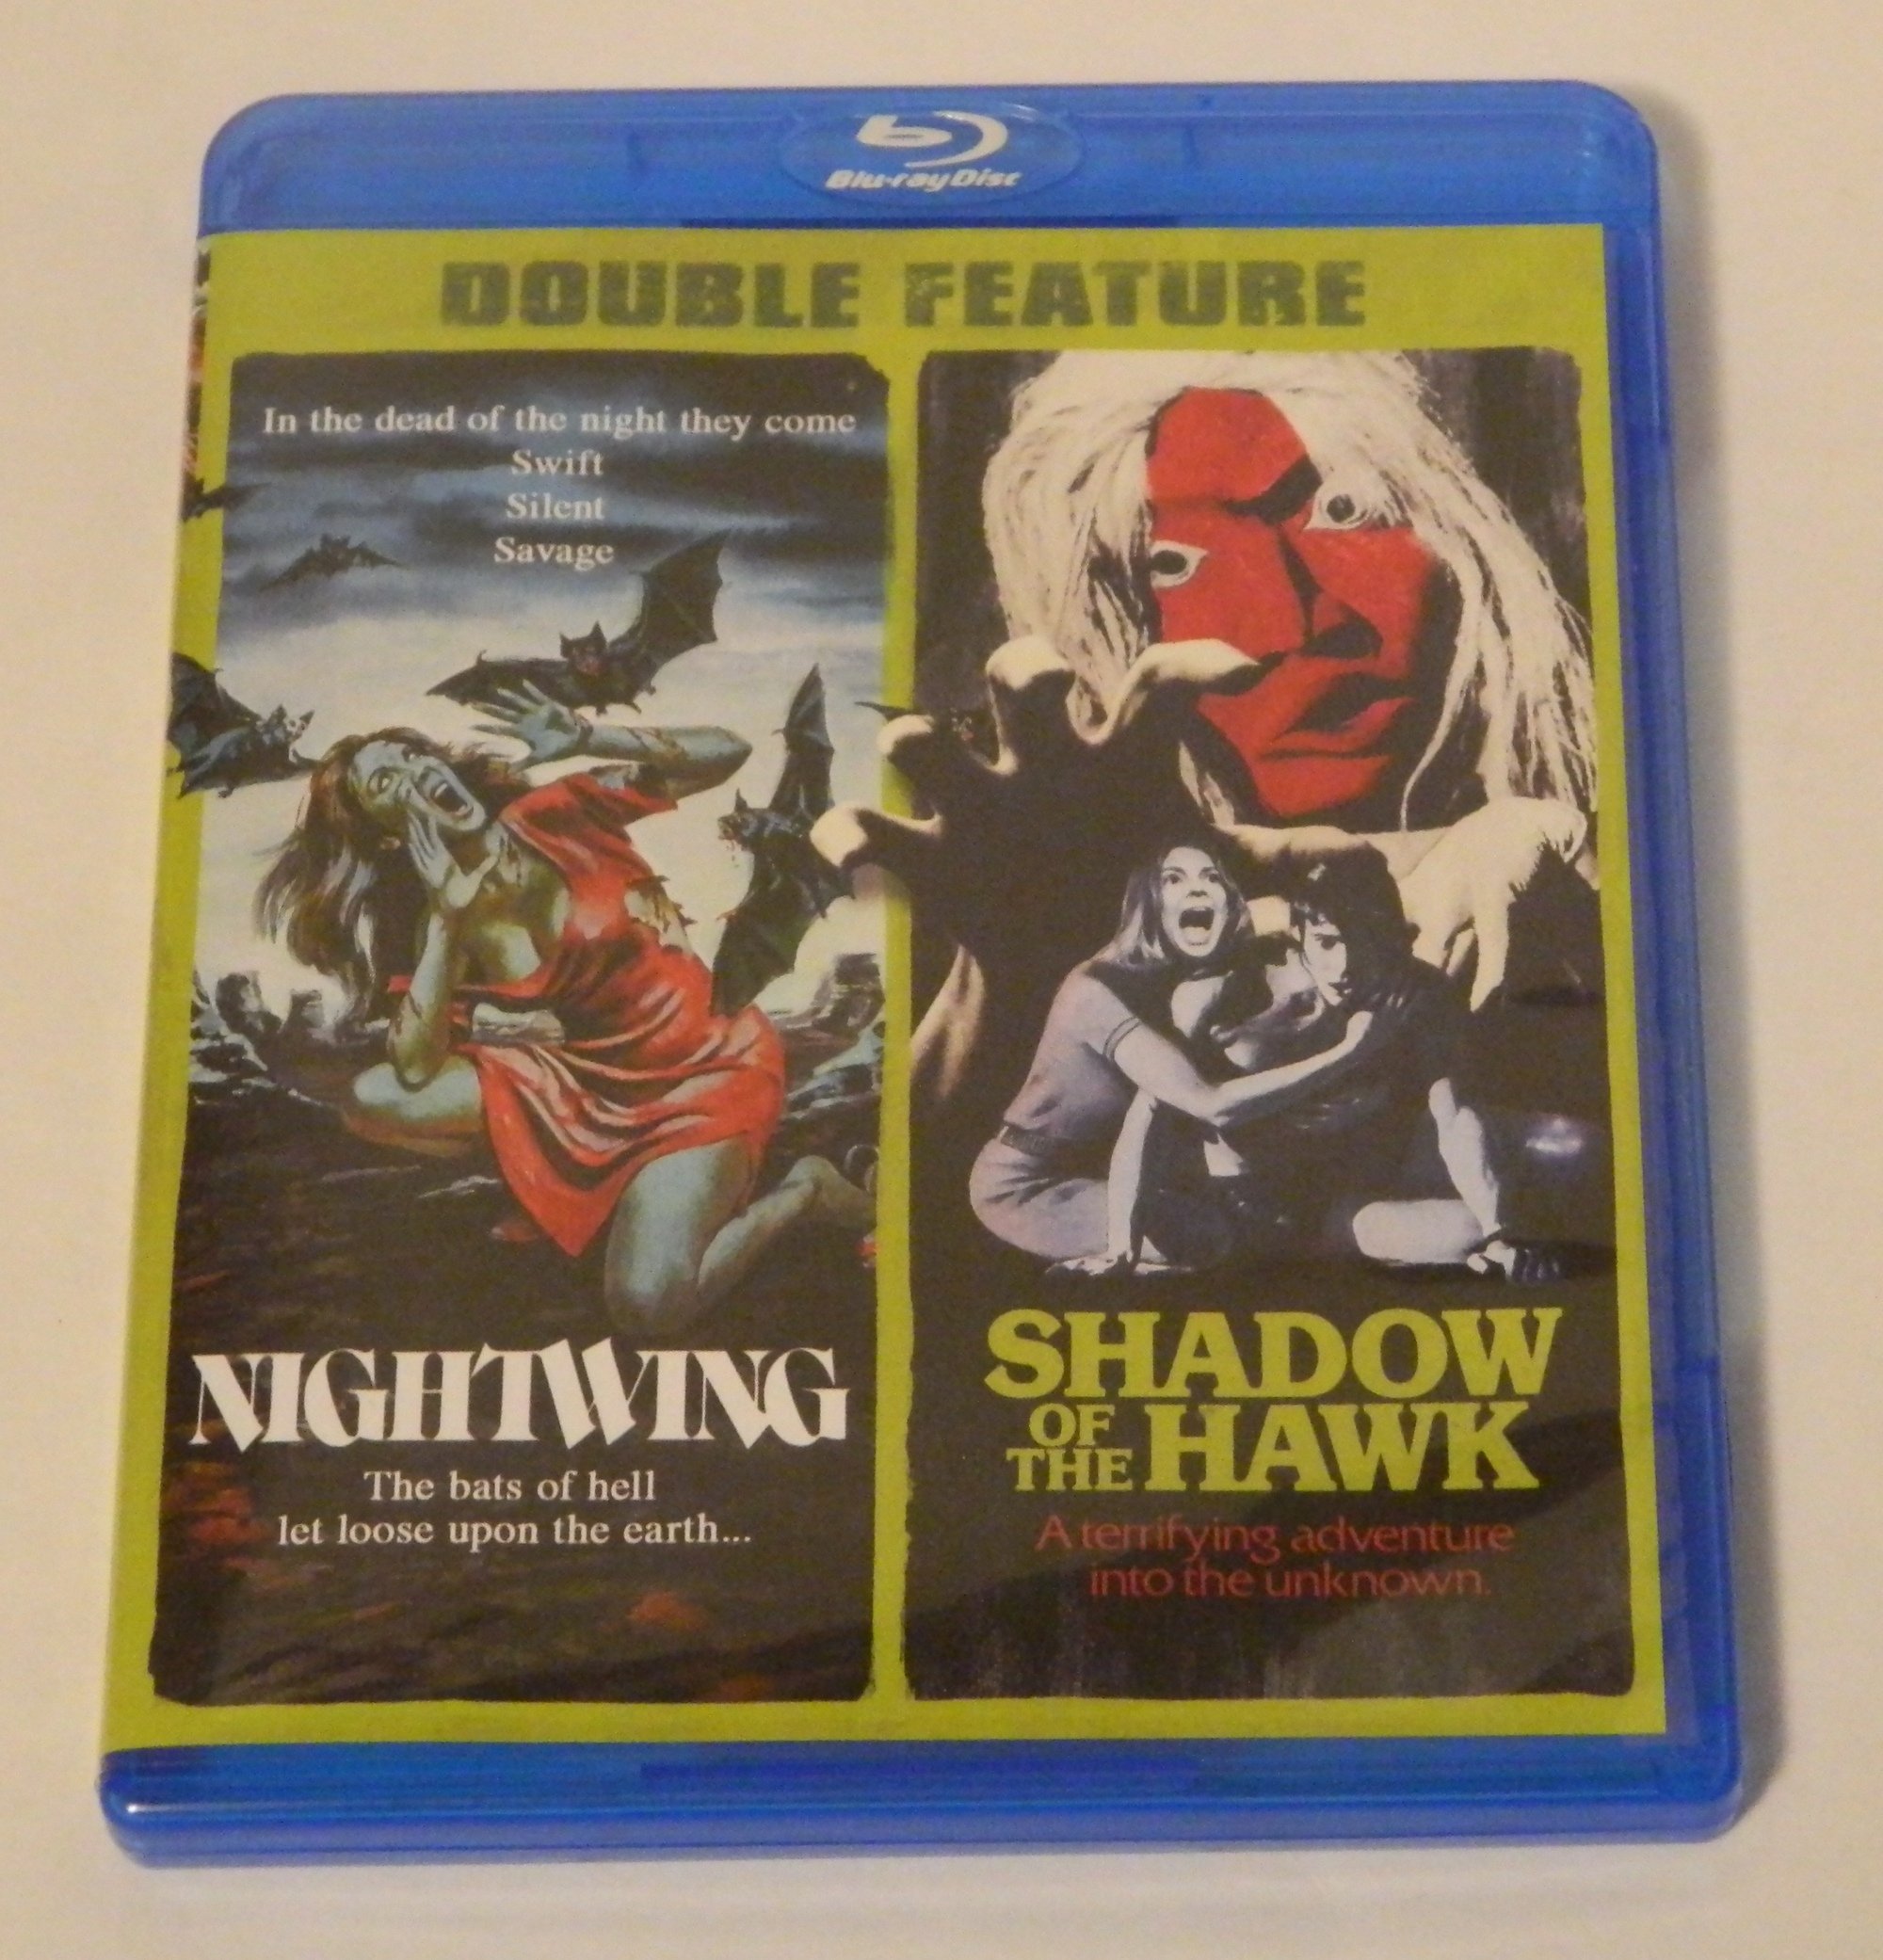 Nightwing/Shadow of the Hawk Double Feature Blu-ray Review